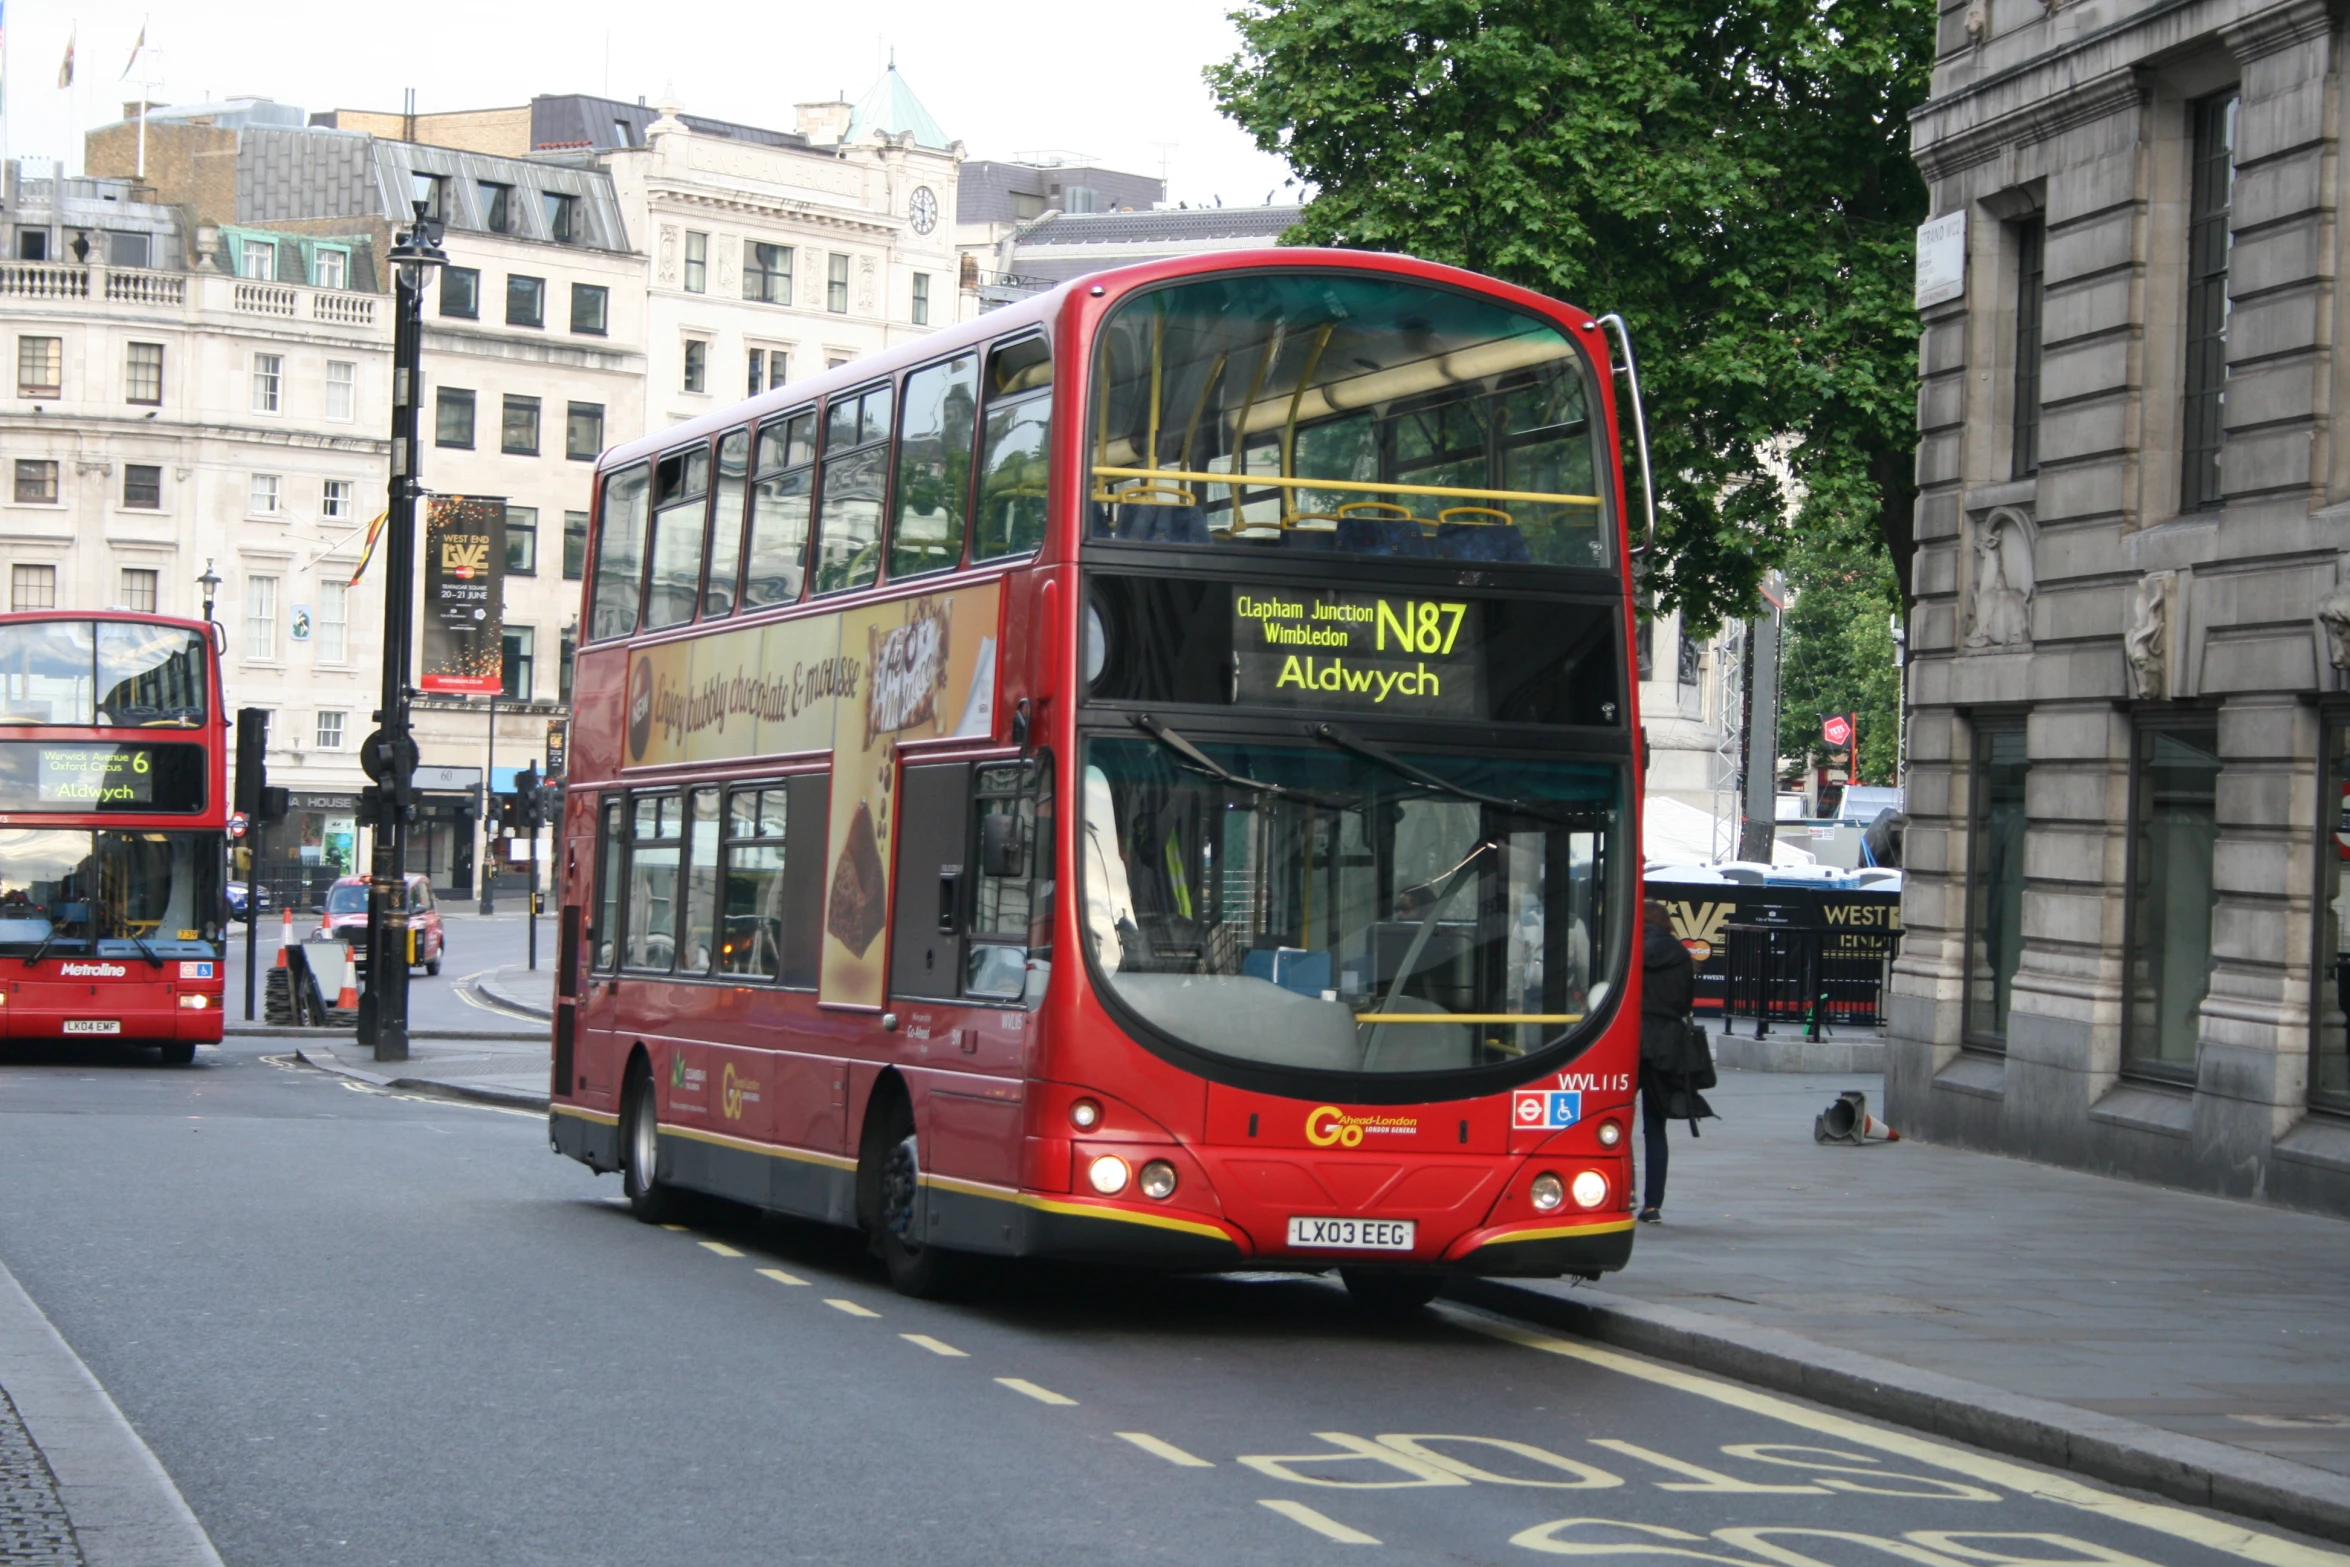 two double decker buses on a city street